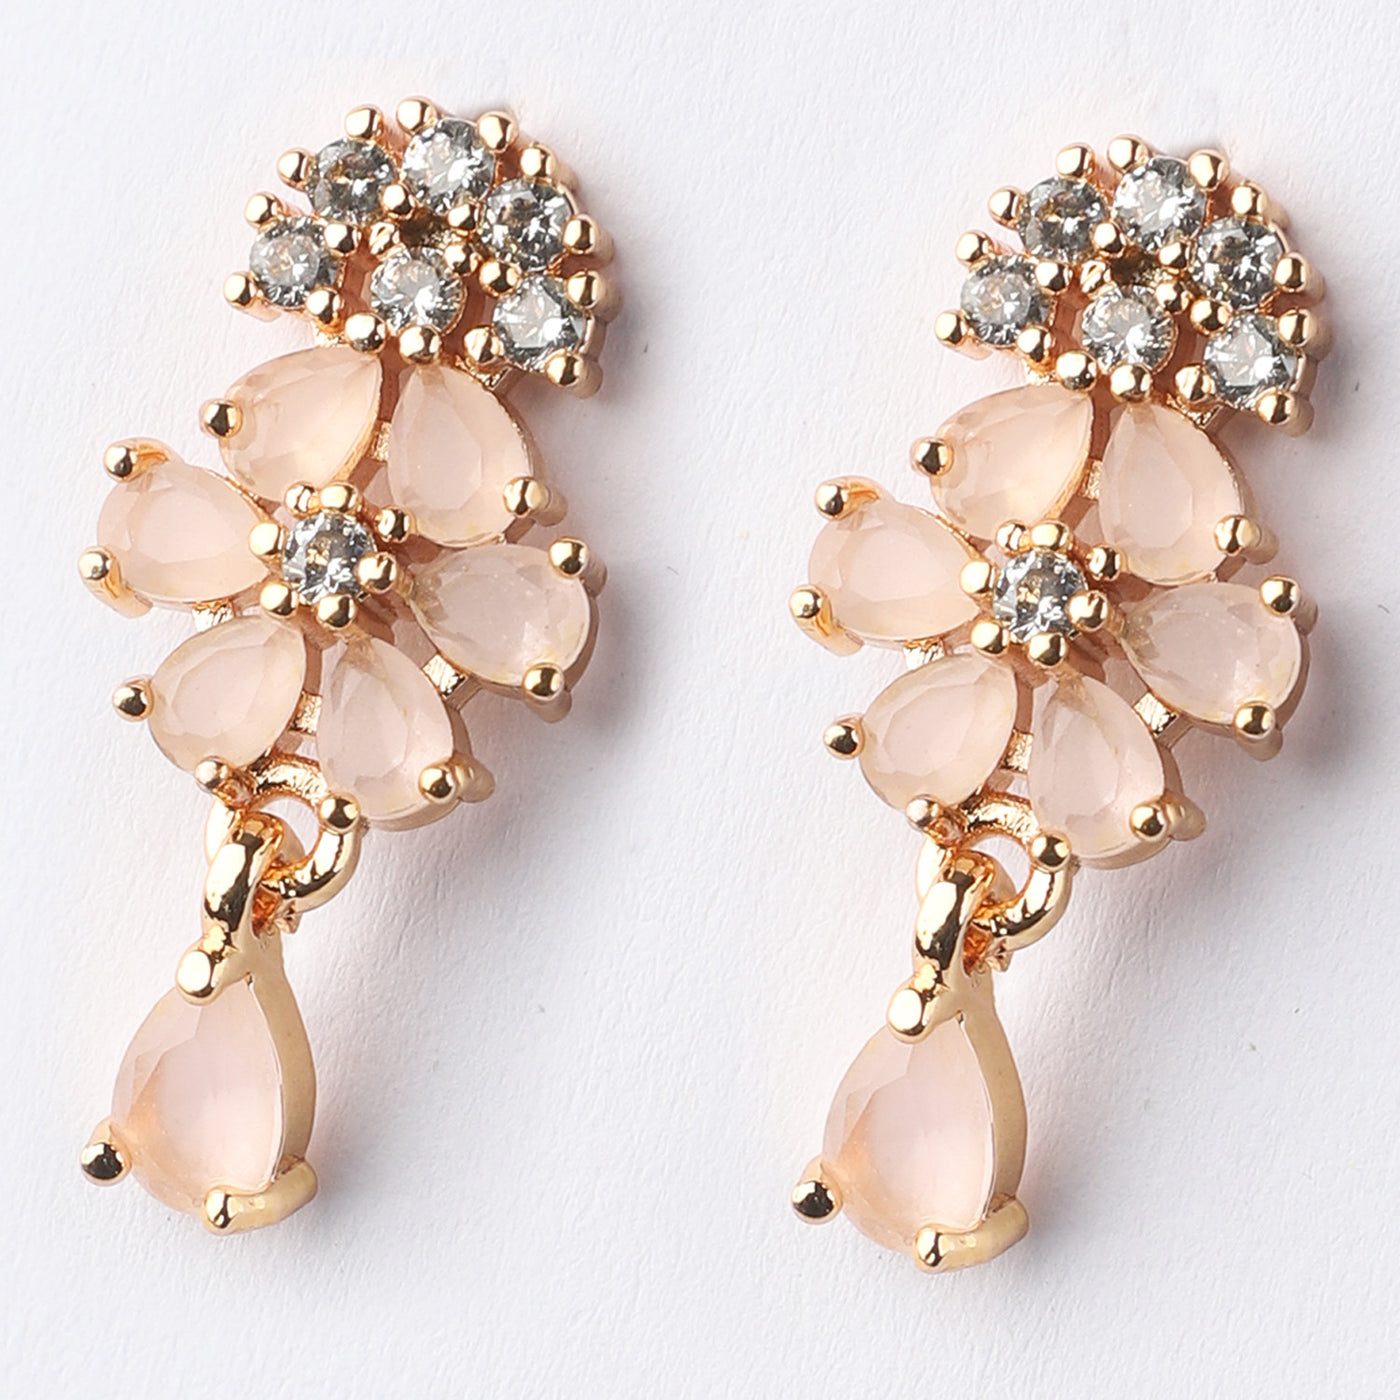 Charming Ears Studs/Tops For Girls